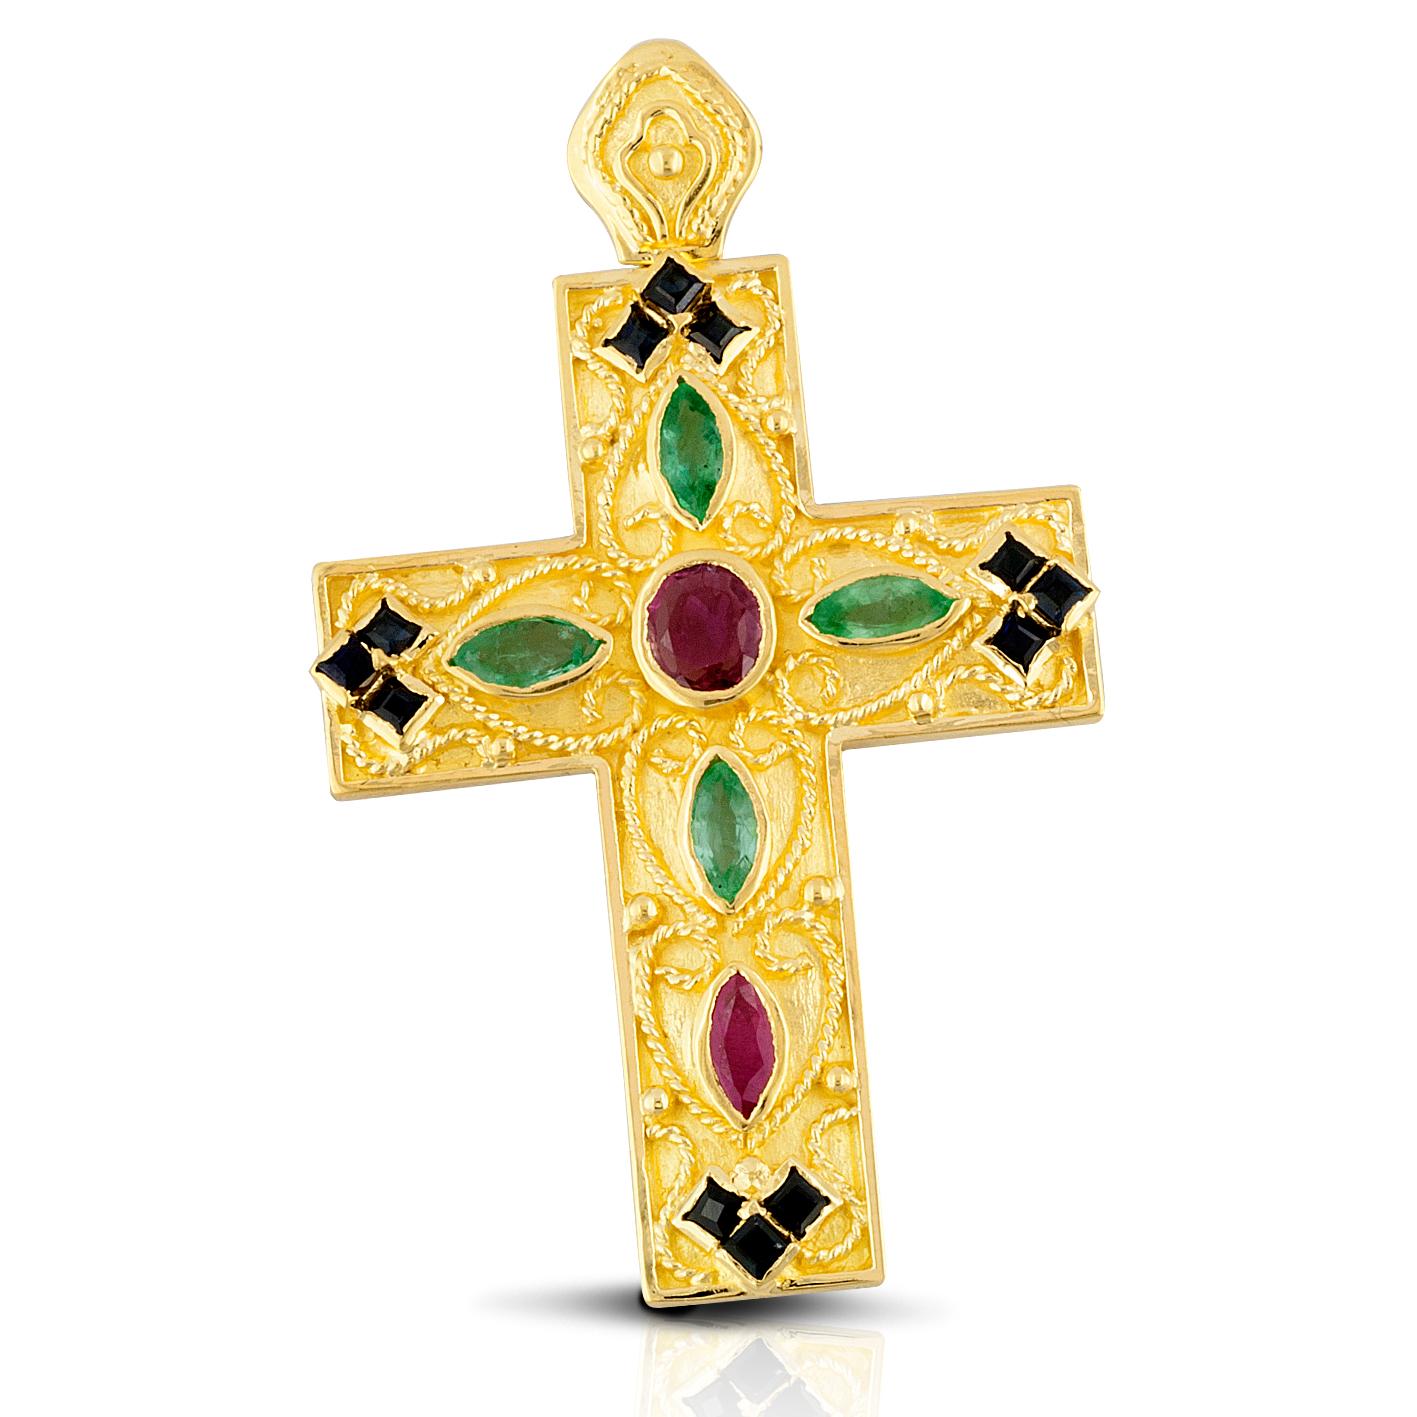 S.Georgios Byzantine Style Cross Pendant is handmade from solid 18 Karat Yellow Gold and features 2 Rubies, 4 Emeralds, and 12 Sapphire all total weight of 2,94 Carat. This stunning art piece is made as an inspiration from the Byzantine Museum in